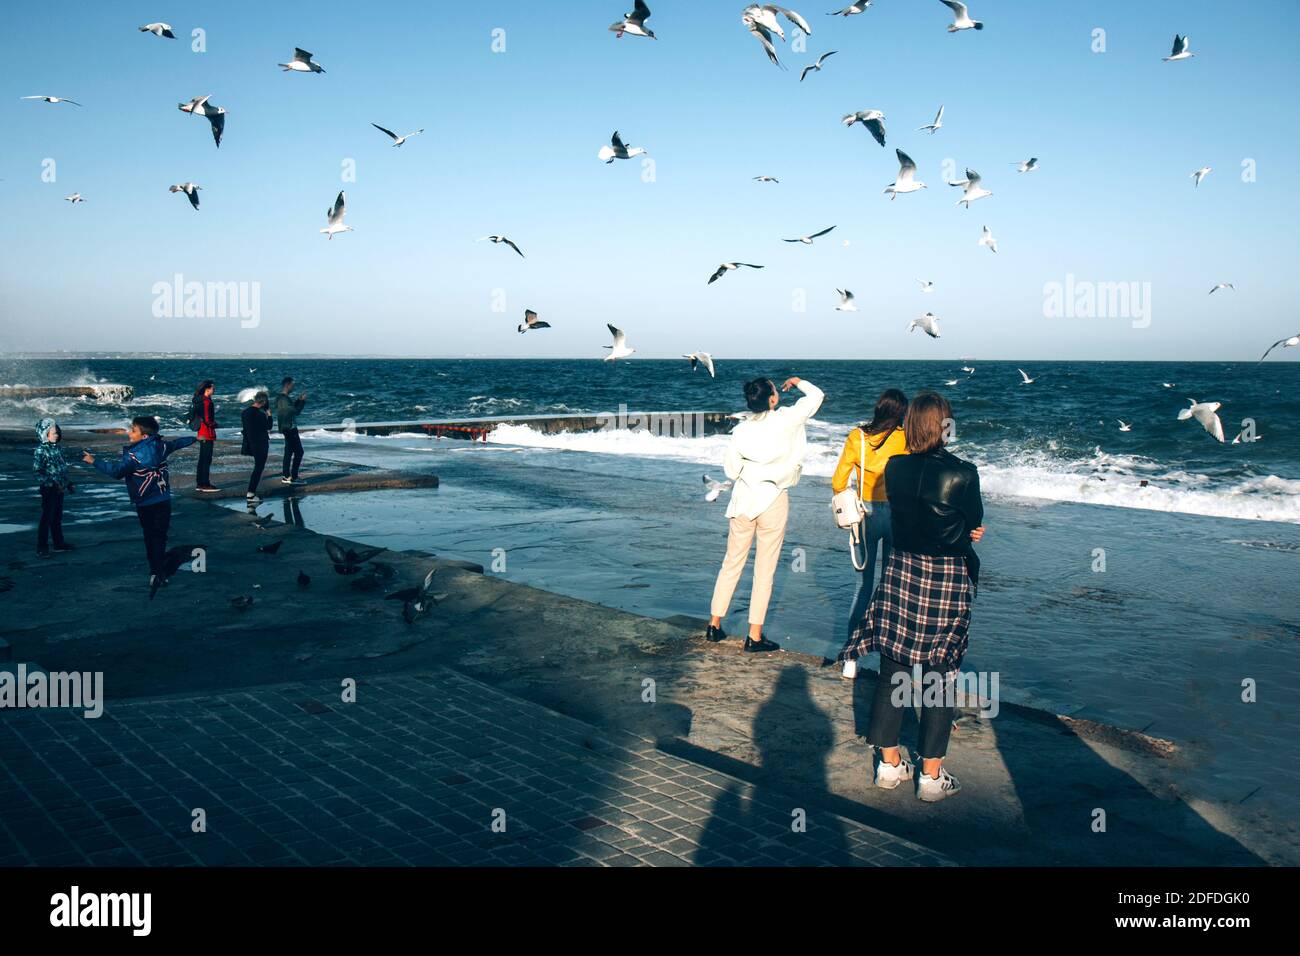 Odessa/Ukraine - October 5, 2020:Stormy sea, ocean and background many seagulls soar in the sky. People feed the birds on the shore. Stock Photo